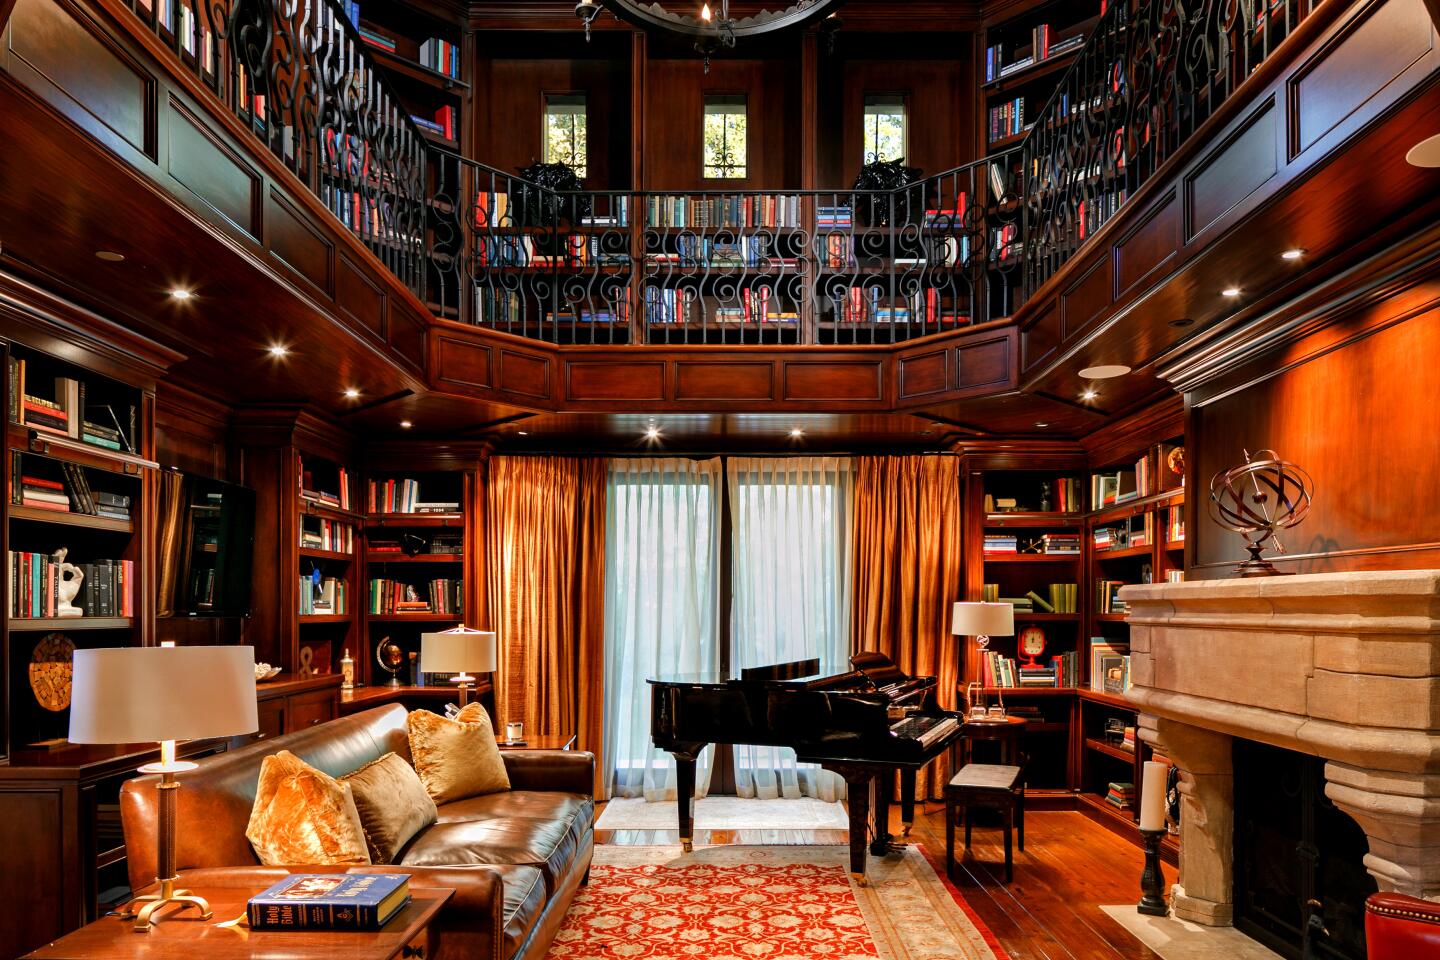 A two-story library is among the features of the 9,659-square-foot home.